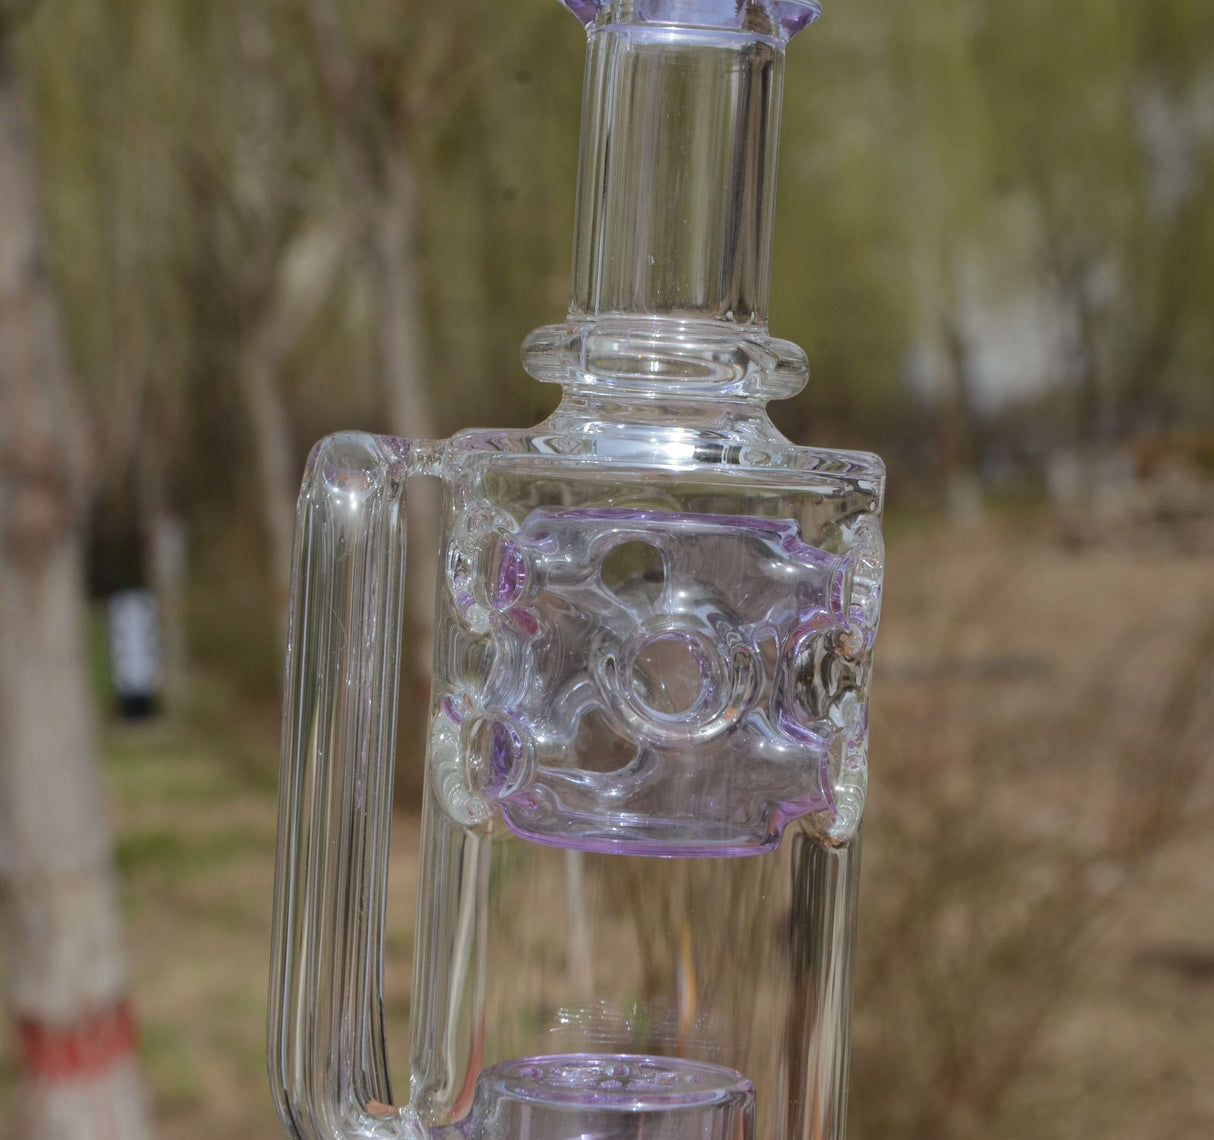 Calibear Straight Fab Puffco Attachment in clear glass with purple accents, outdoor background